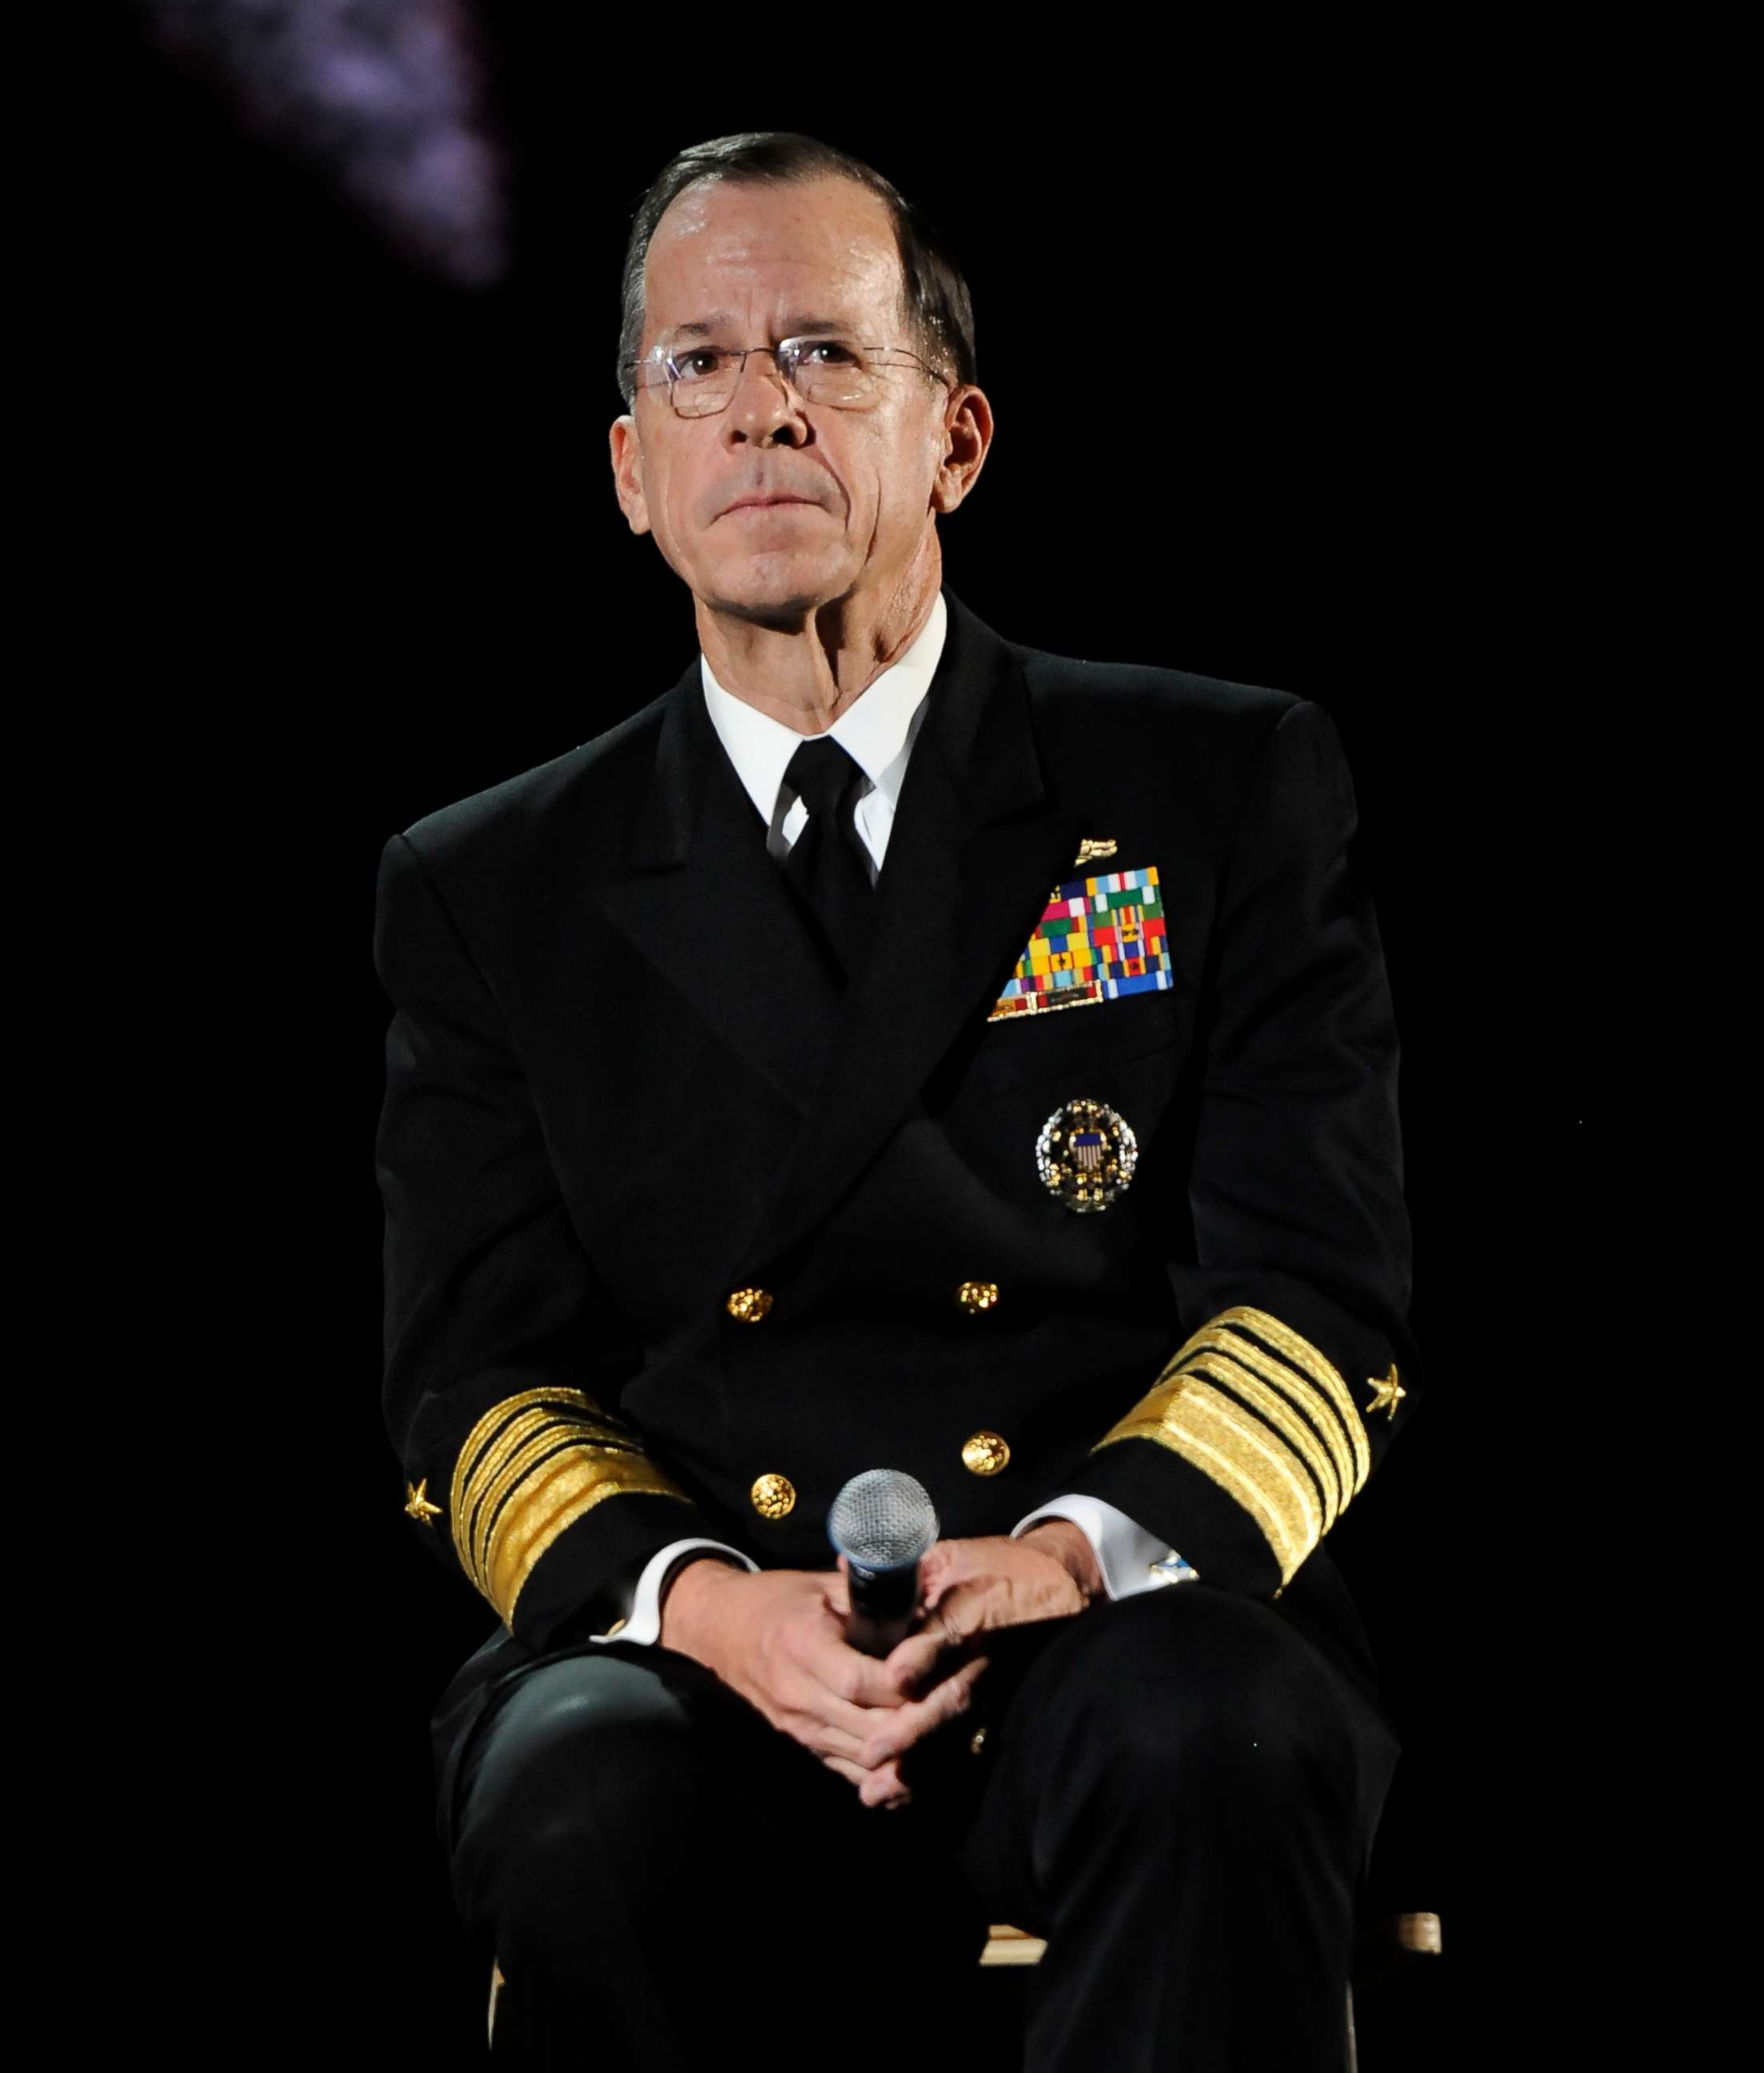 PHOTO: Chairman of the Joint Chiefs of Staff Admiral Michael Mullen appears onstage at an event on May 9, 2011, in New York.